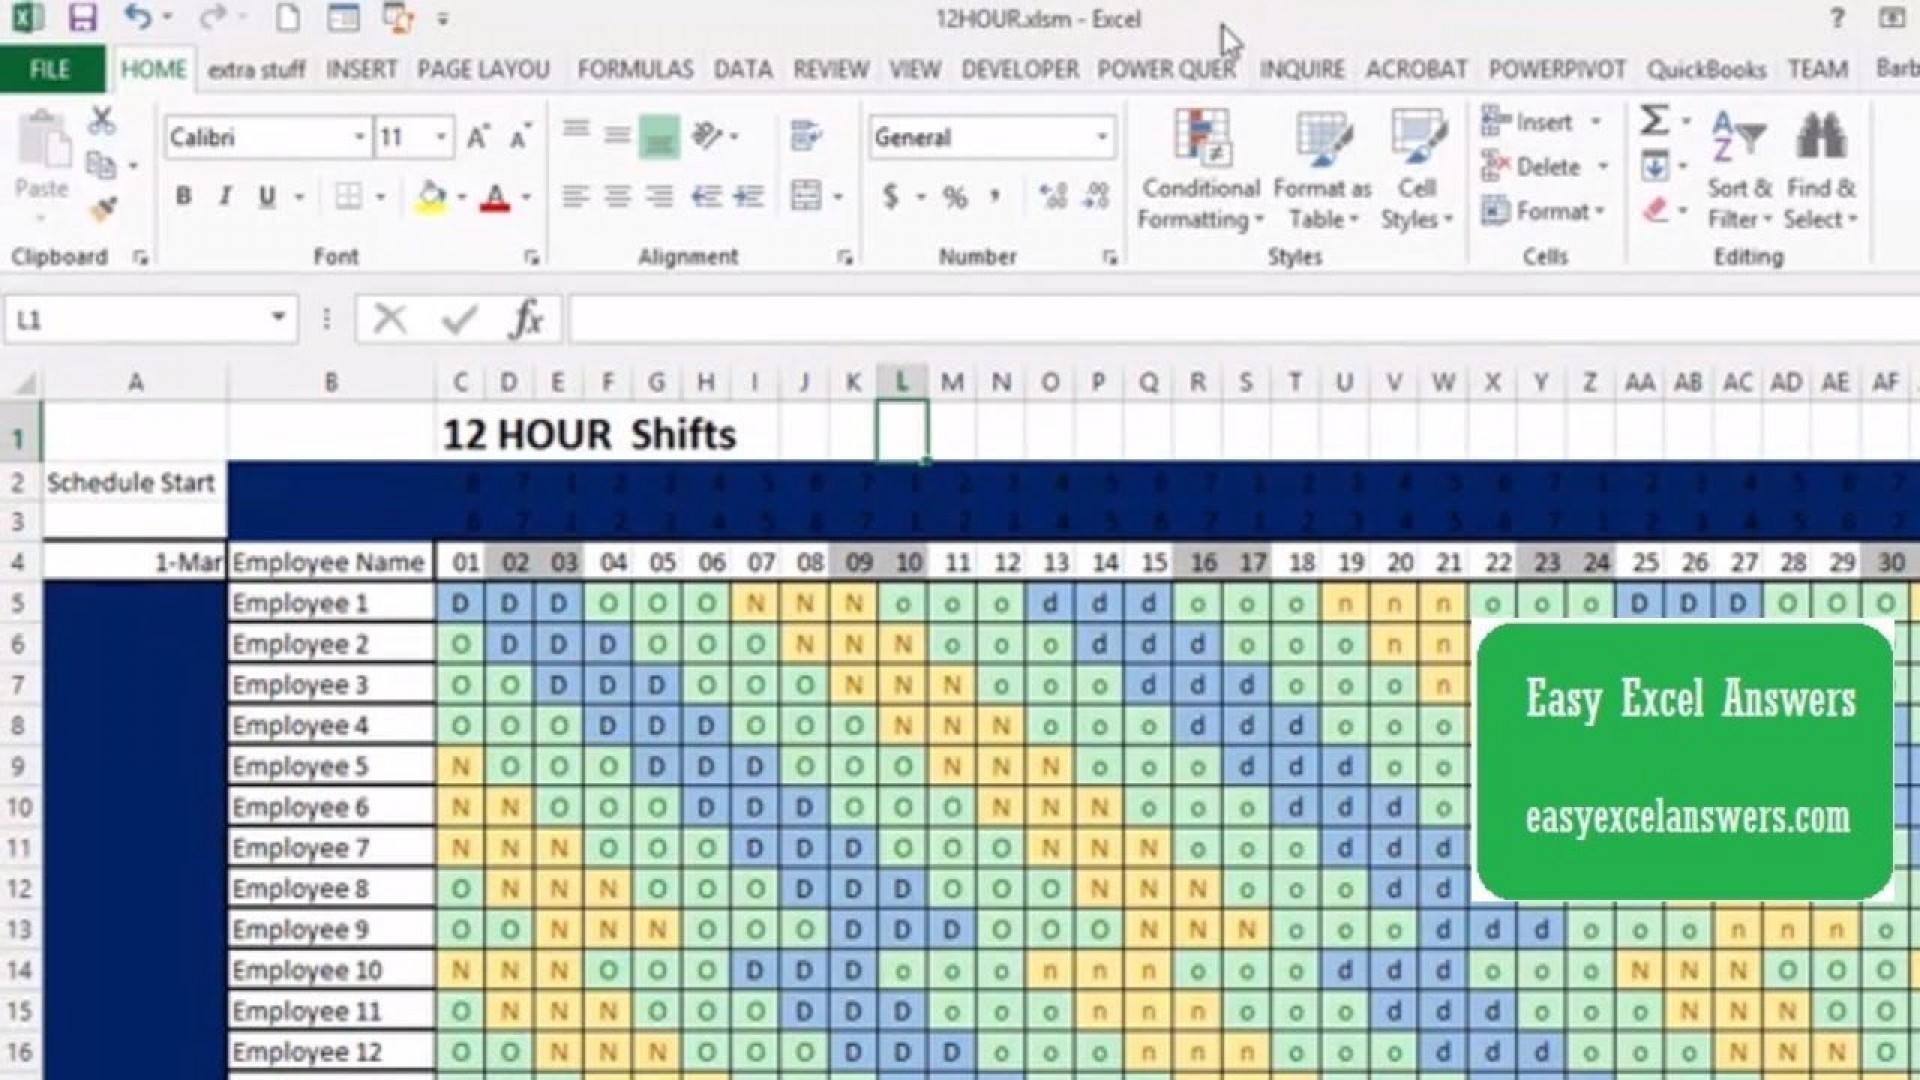 12 Hour Shift Schedule Template ~ Addictionary intended for 12 Hour Shift Schedule Calendar